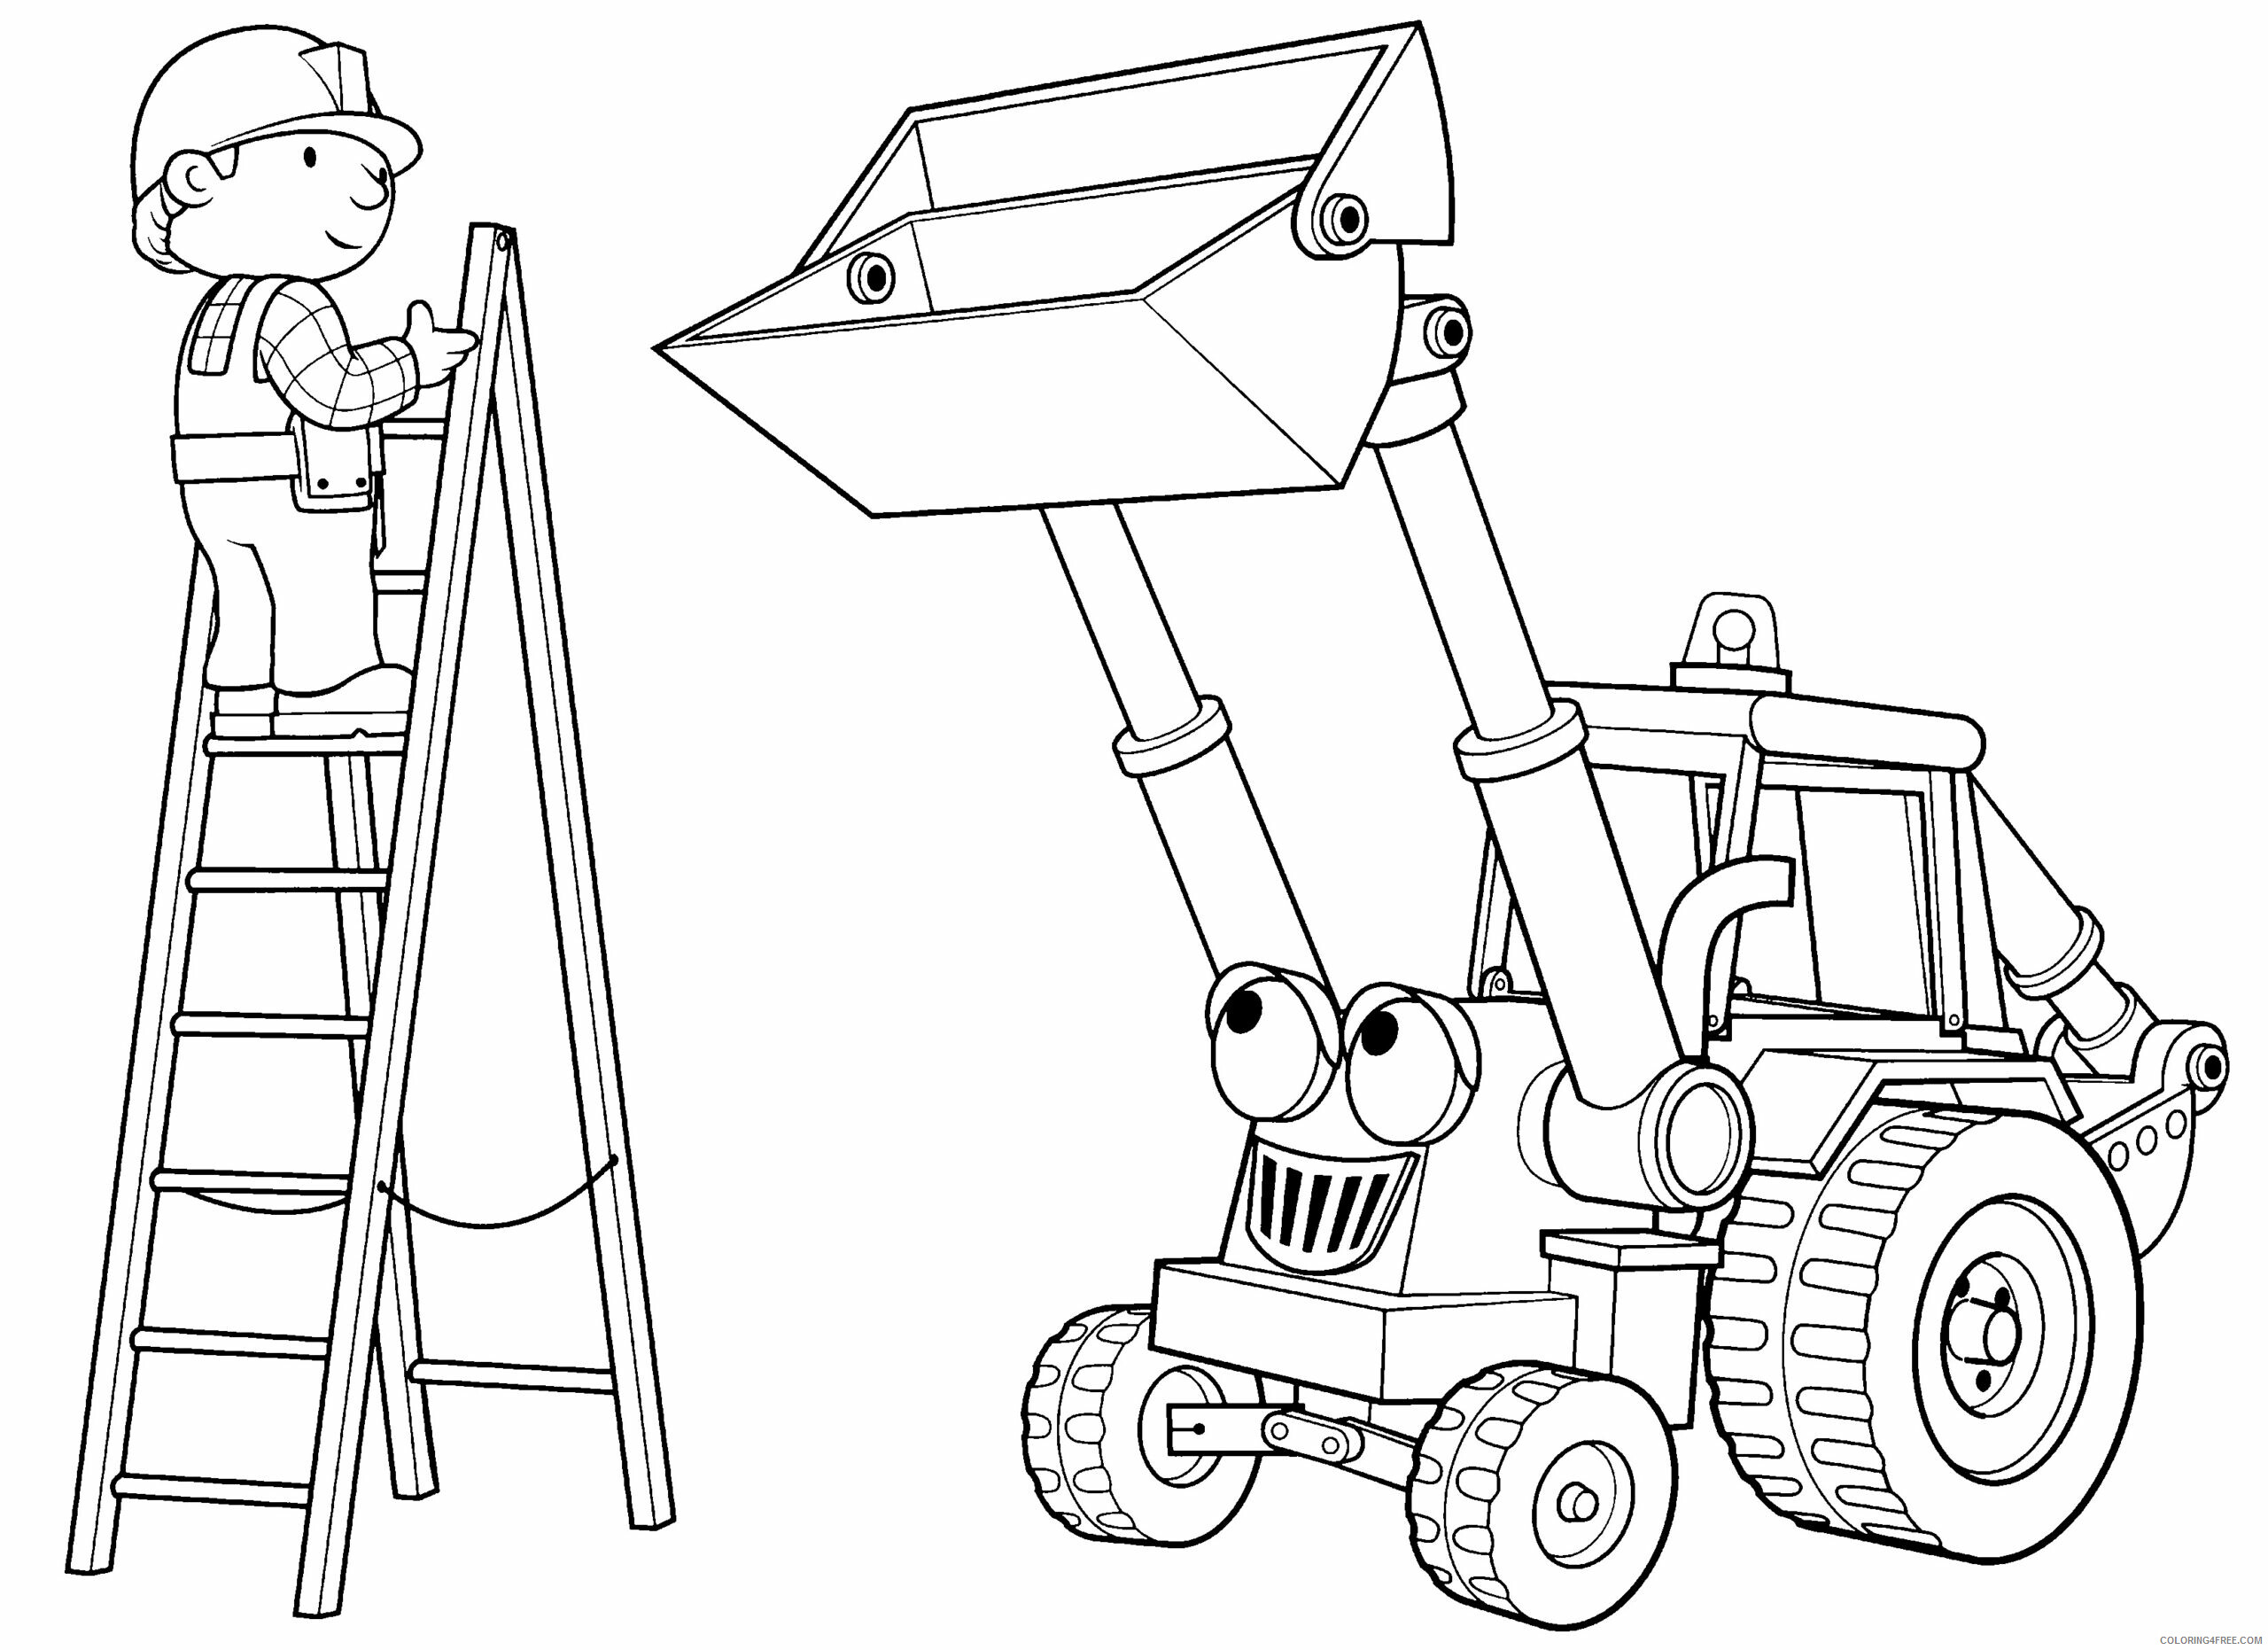 Bob the Builder Coloring Pages TV Film bob the builder 24 Printable 2020 01042 Coloring4free